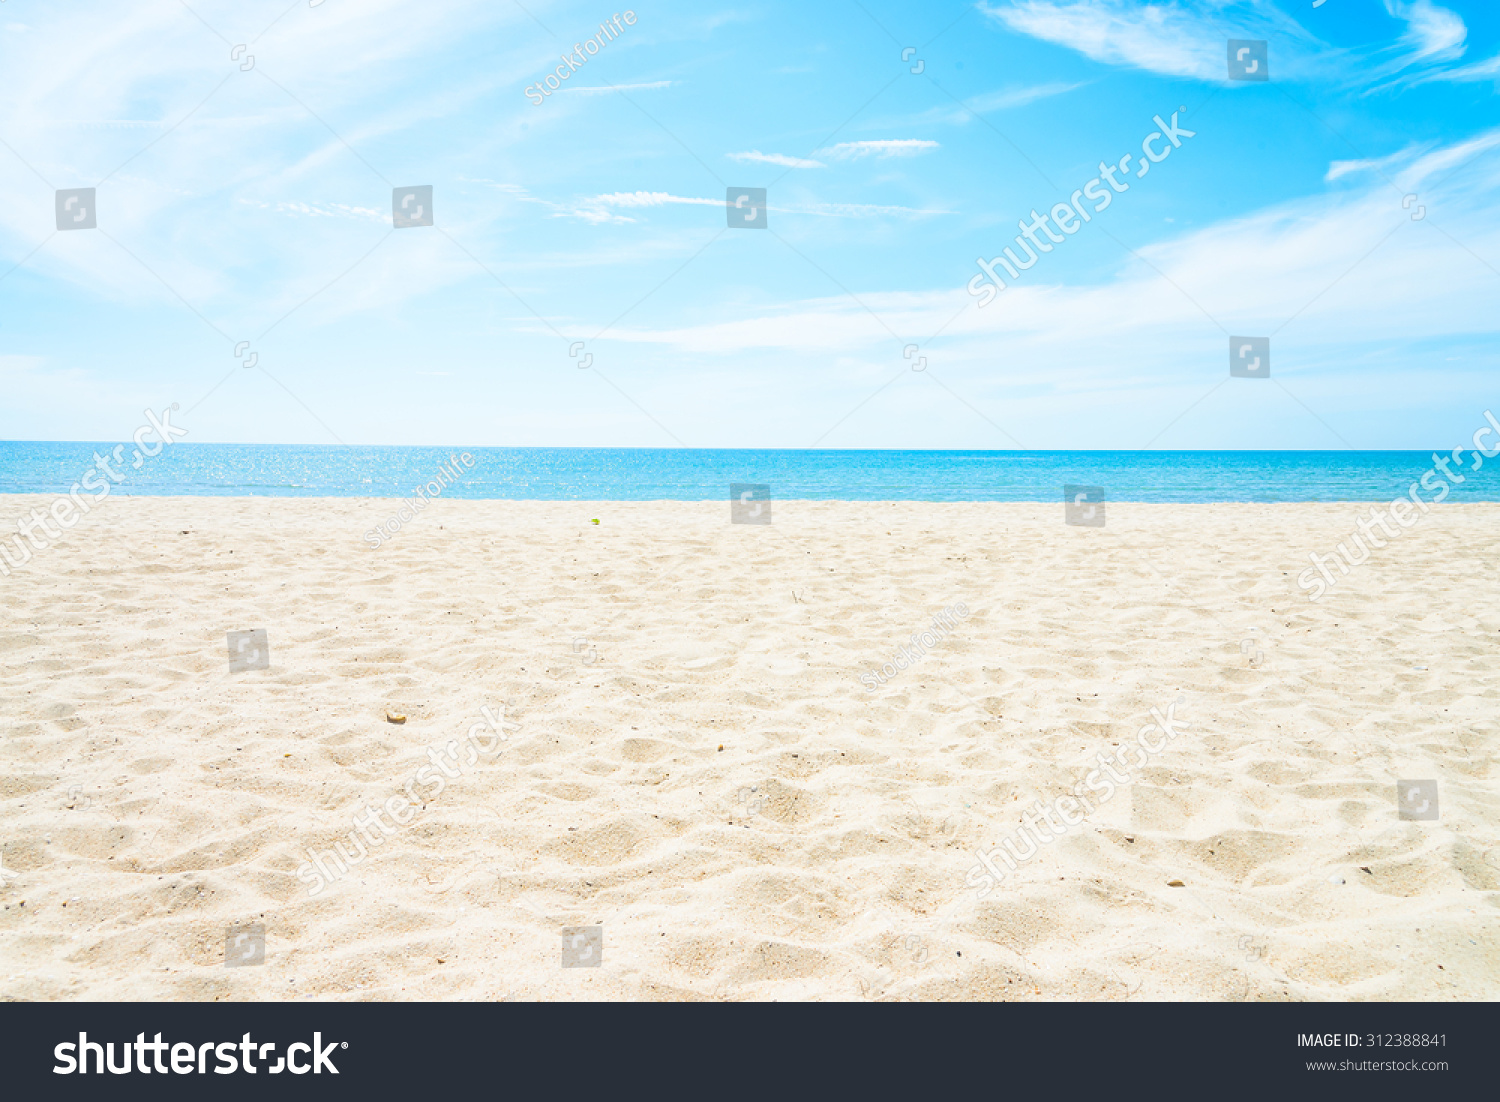 Empty sea and beach background with copy space #312388841